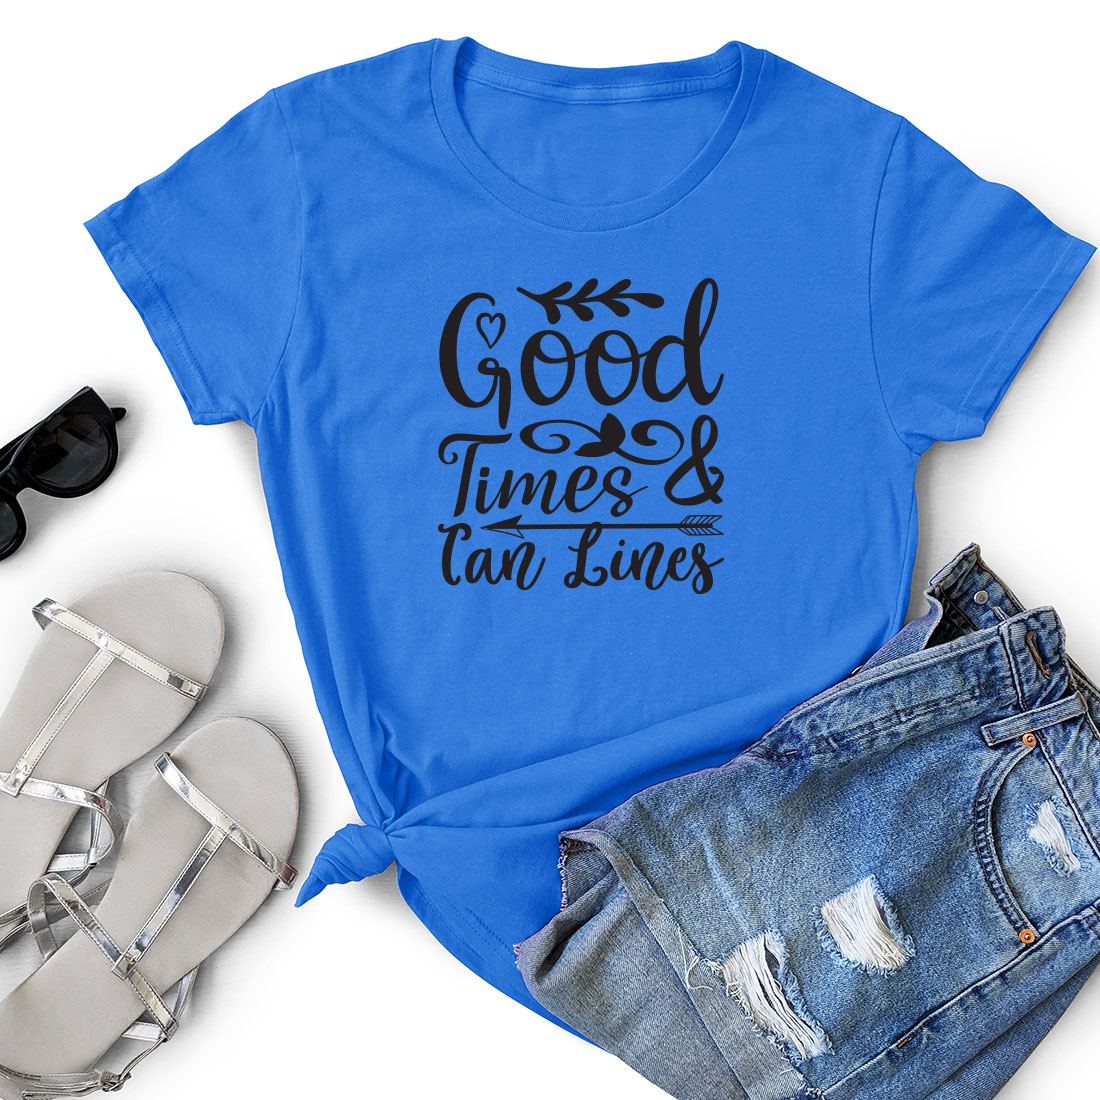 T - shirt that says good times and tan issues.